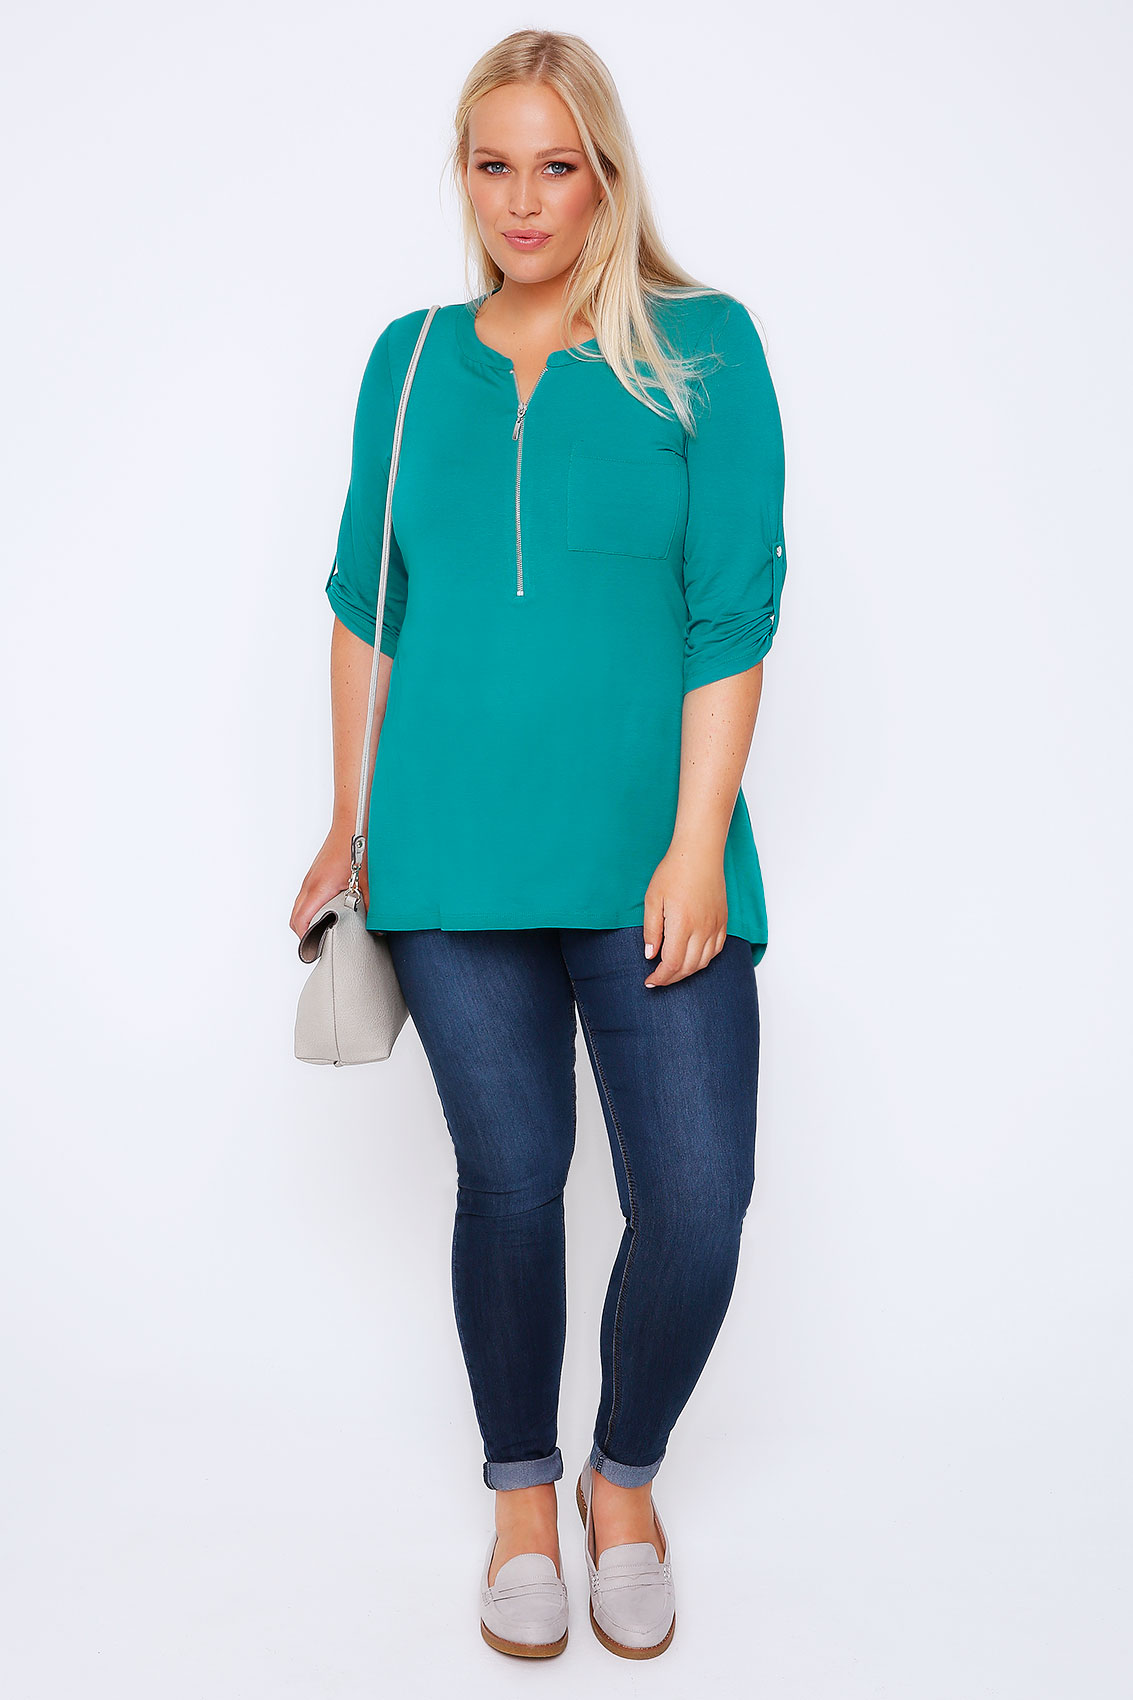 Teal Zip Front Jersey Top With 3/4 Length Sleeves Plus Size 16 to 32